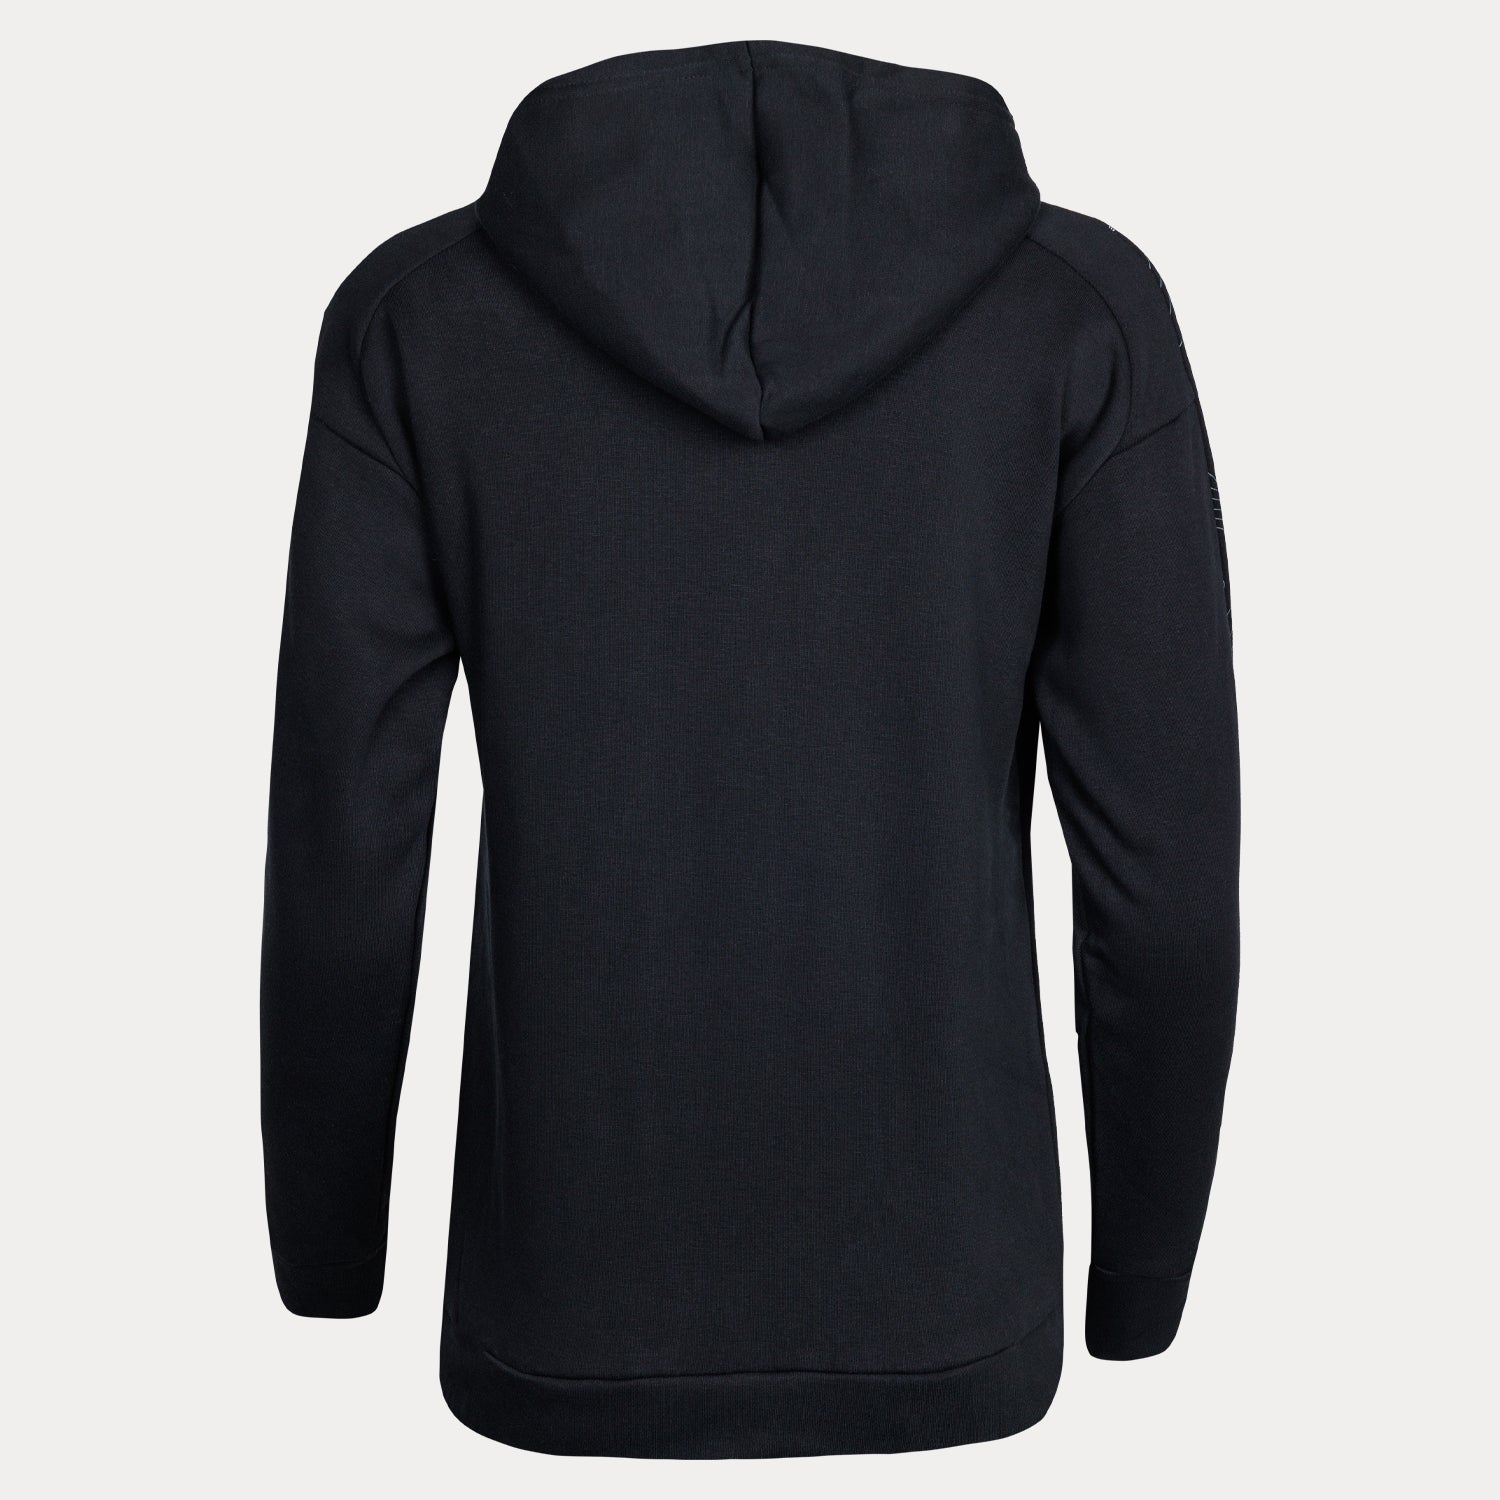 Black 1/4 zip pull over hoodie with hydrow logo on left chest